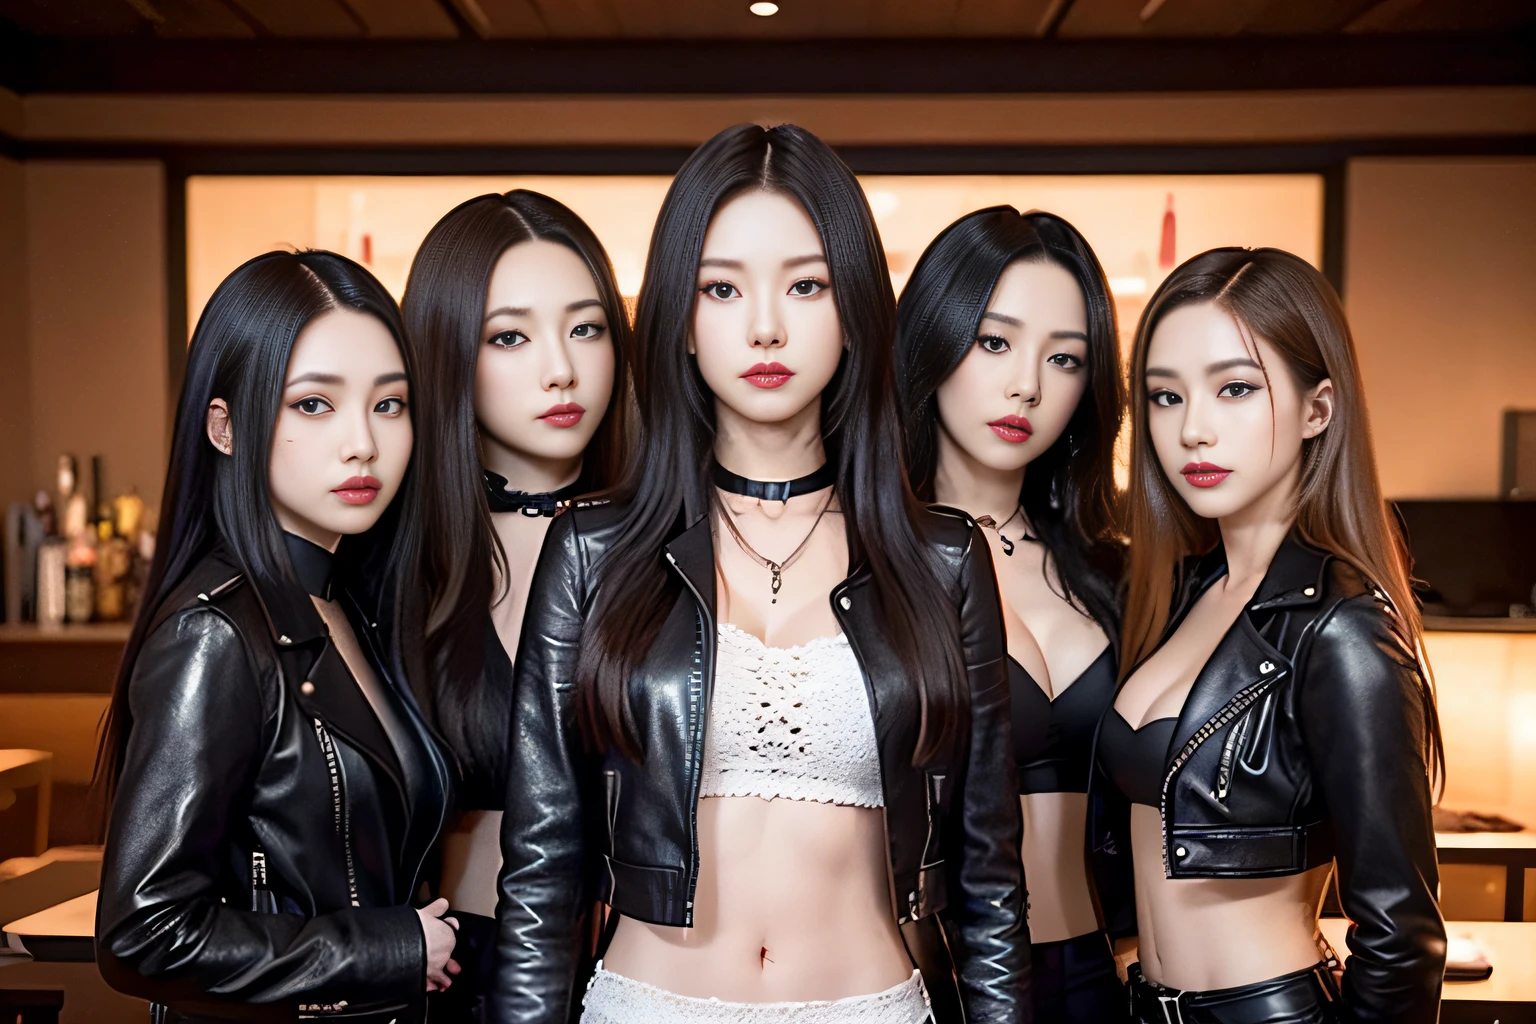 5 member girl band、metal bands、Upper body view、超A high resolution、An ultra-high picture quality、8K、Wonderful expression with attention to detail、All have long brown curly hair、Black leather jacket、Performance scene at a live house